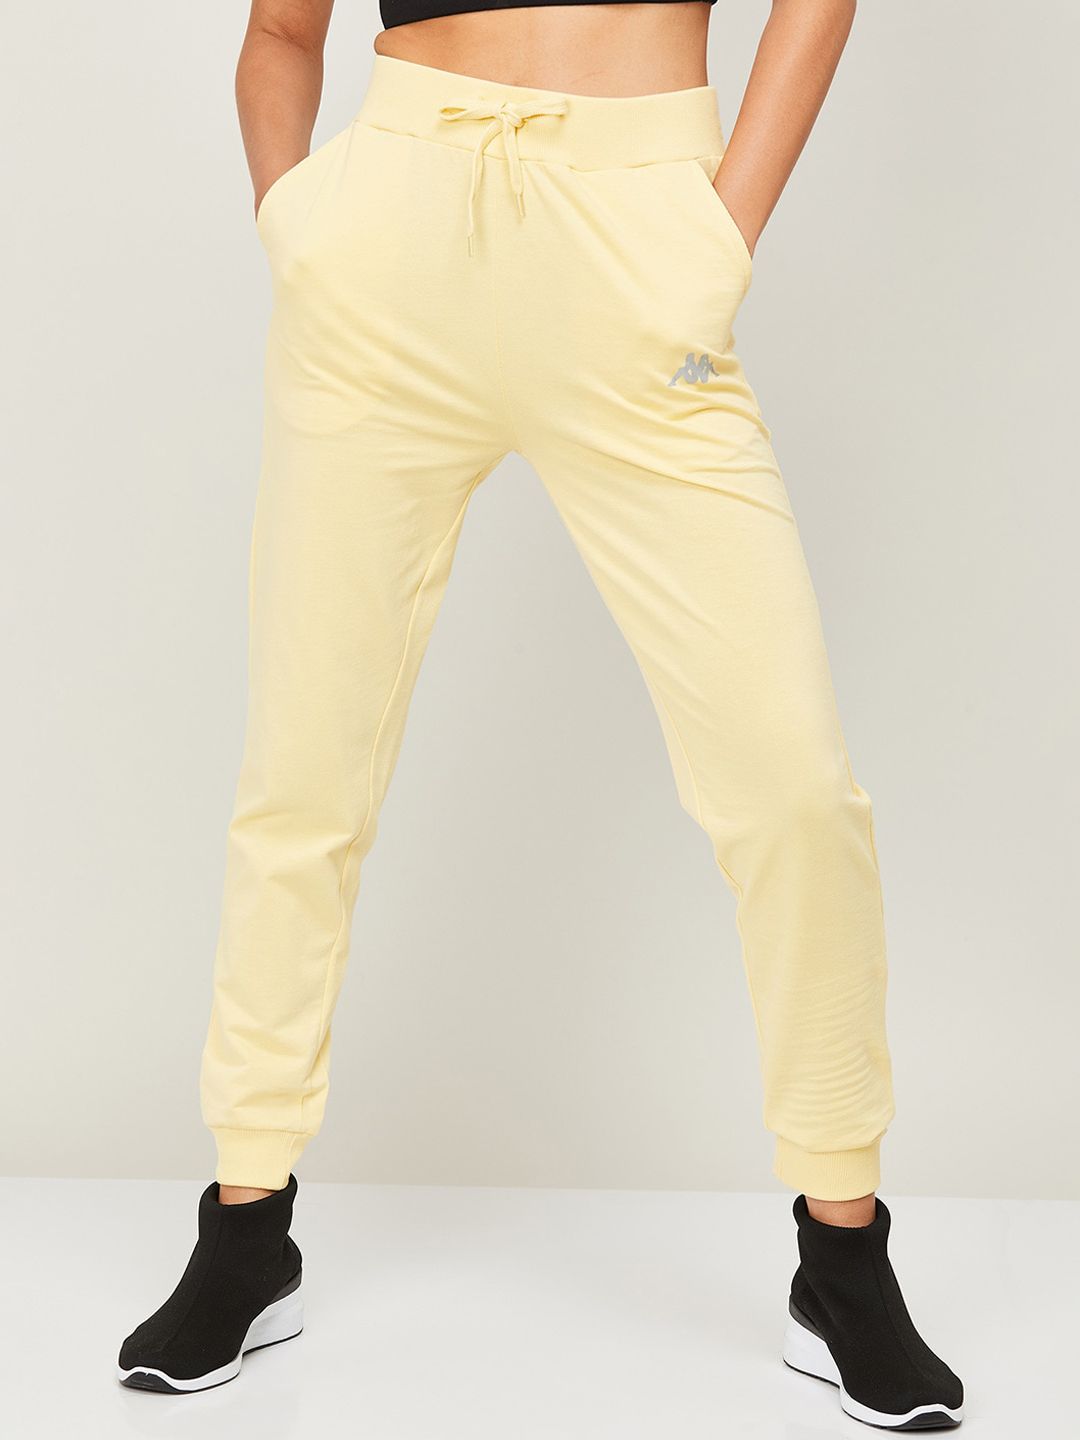 Kappa Women Yellow Solid Cotton Joggers Price in India